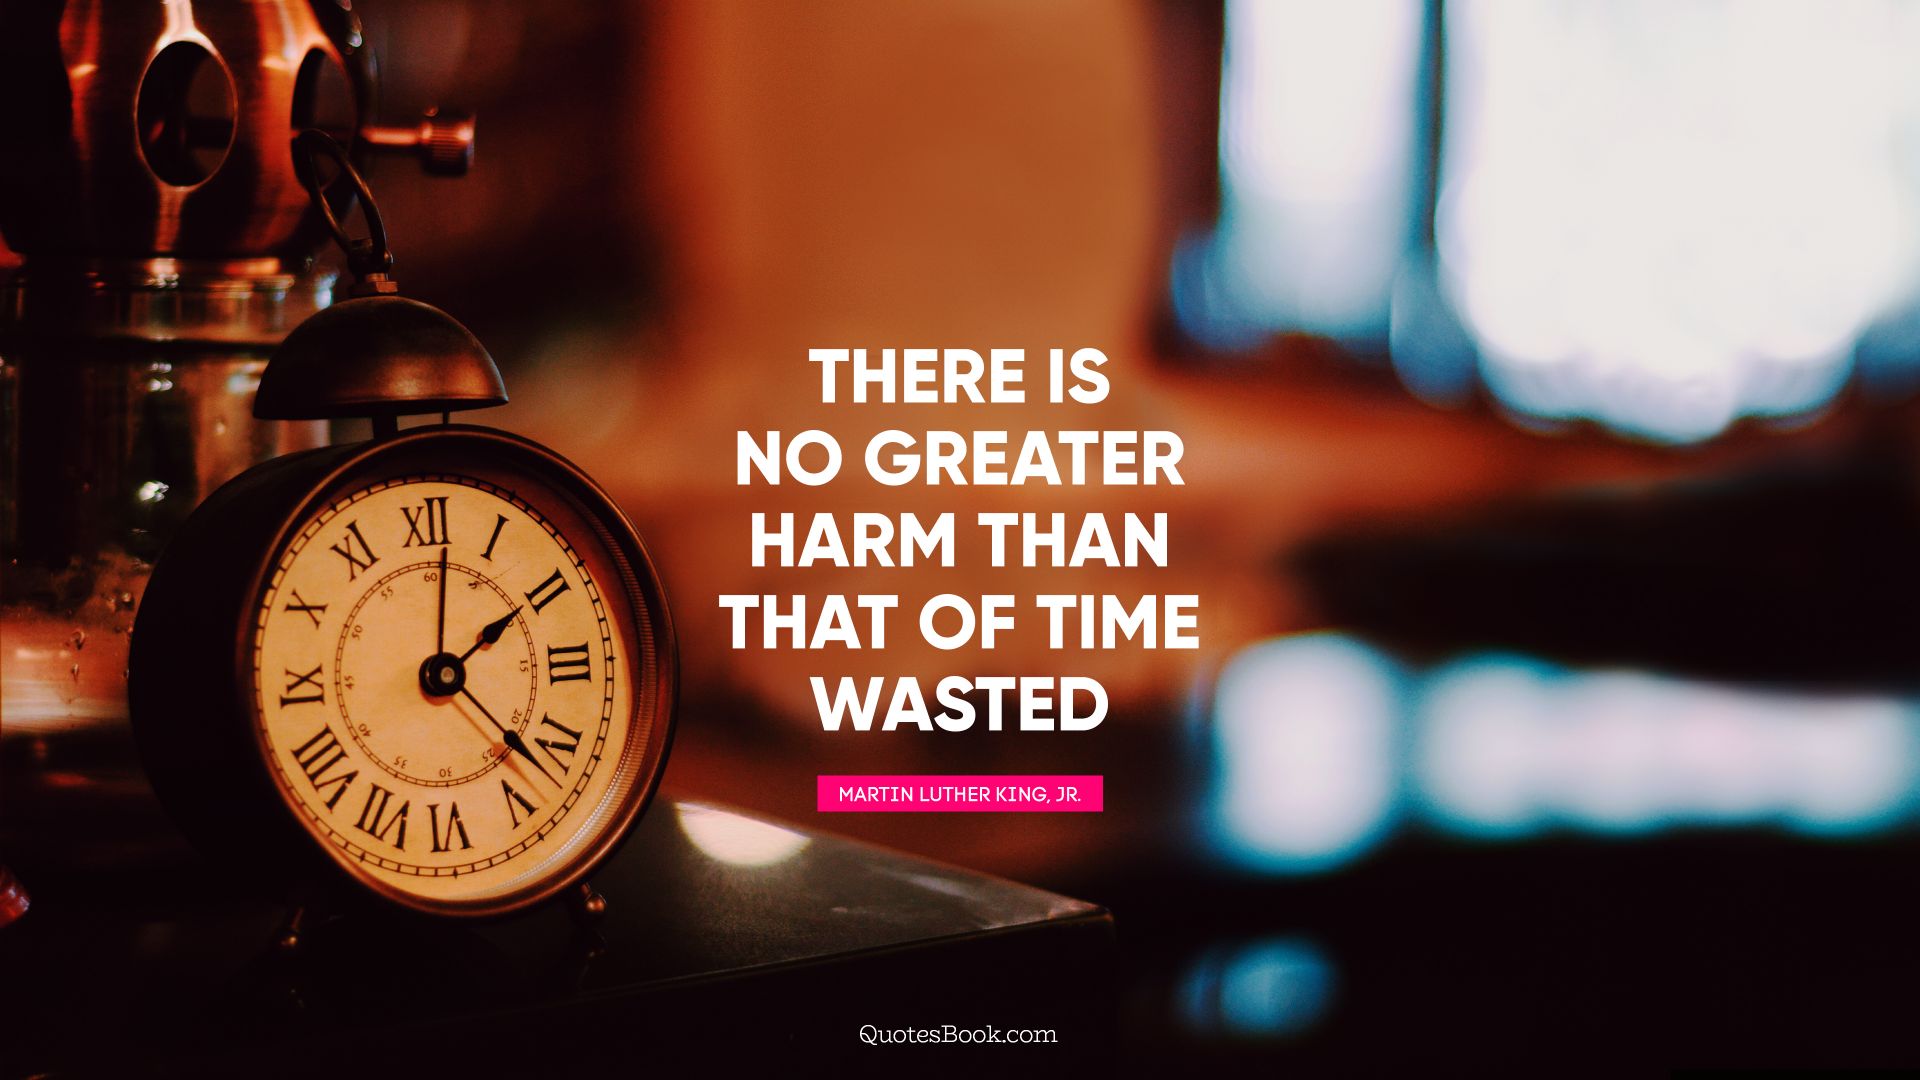 There is no greater harm than that of time wasted. - Quote by Martin Luther King, Jr.